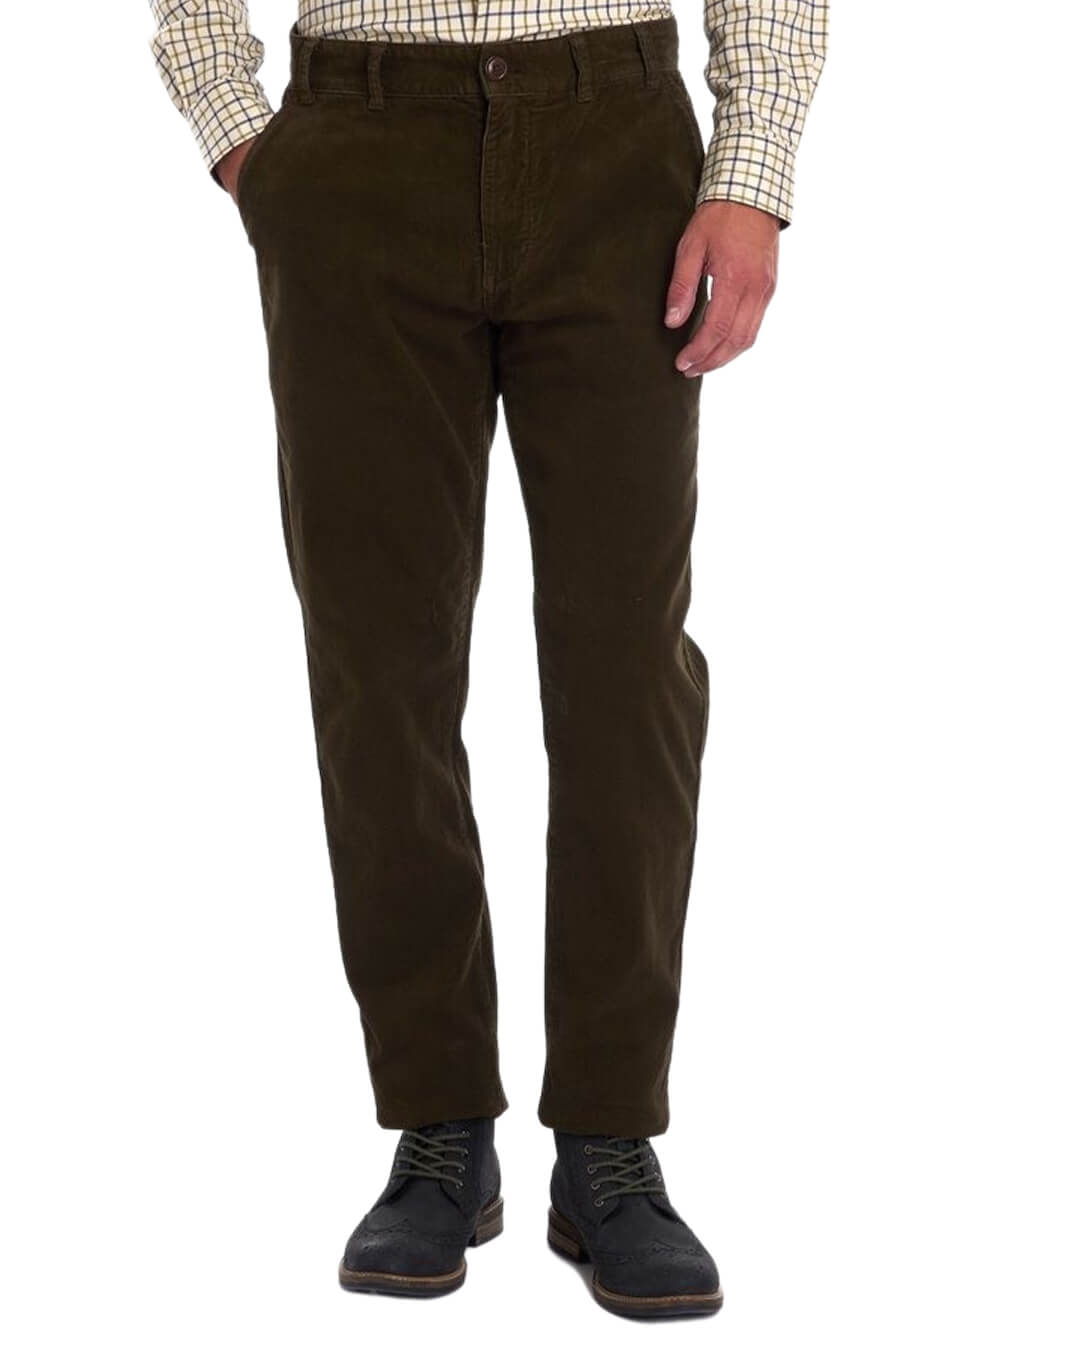 Barbour Trousers Barbour Neuston Green Stretch Cord Trousers